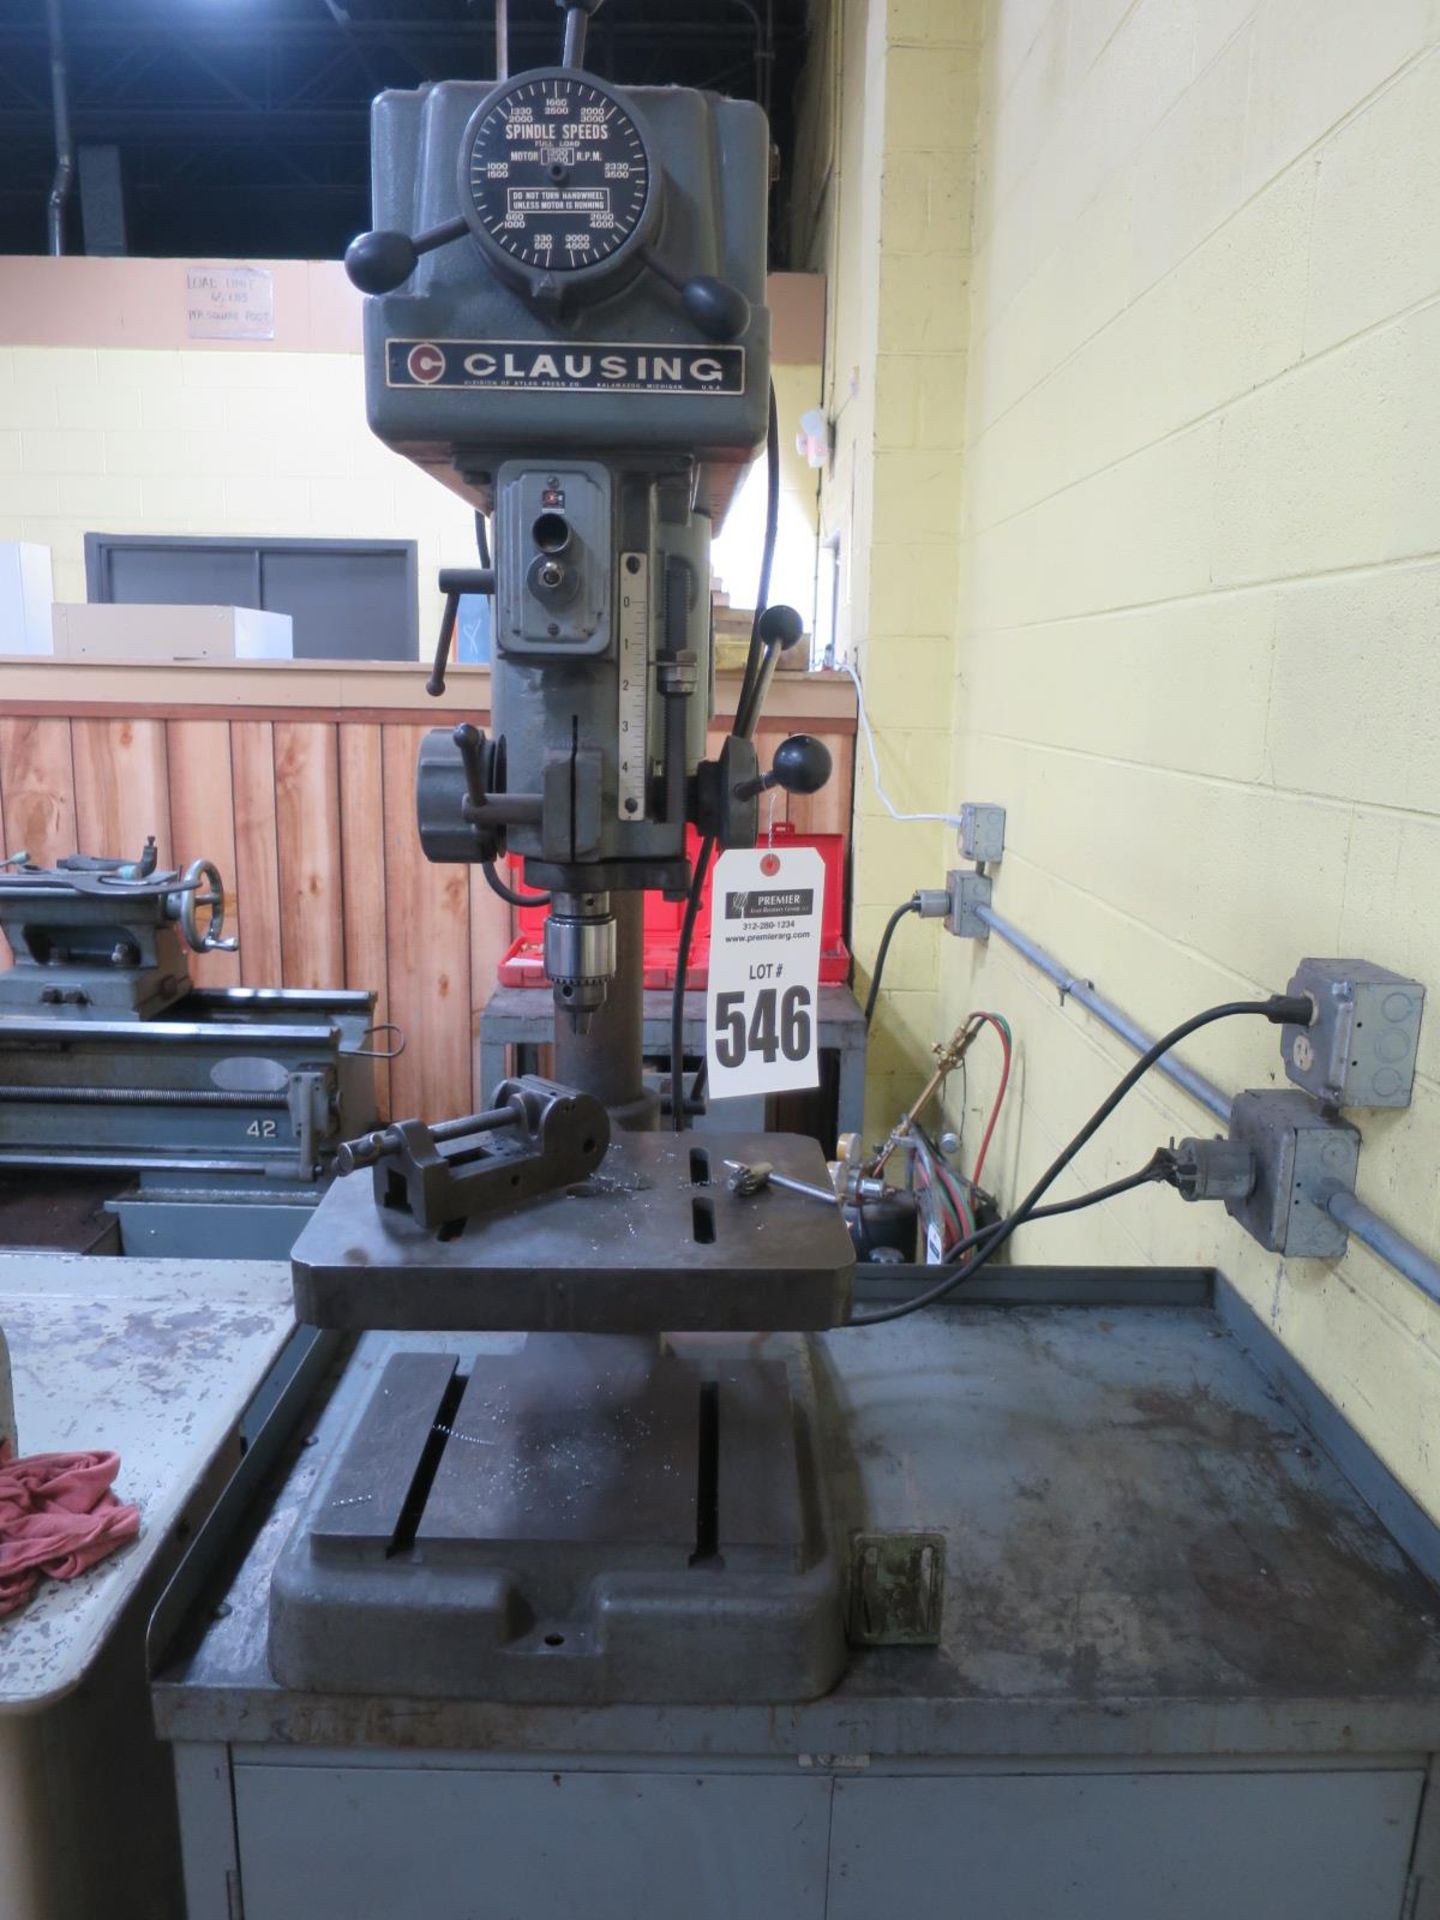 Clausing Series 16Vc 15" Variable Speed Drill Press, Sn 506266 With Jacobs Chuck and vice